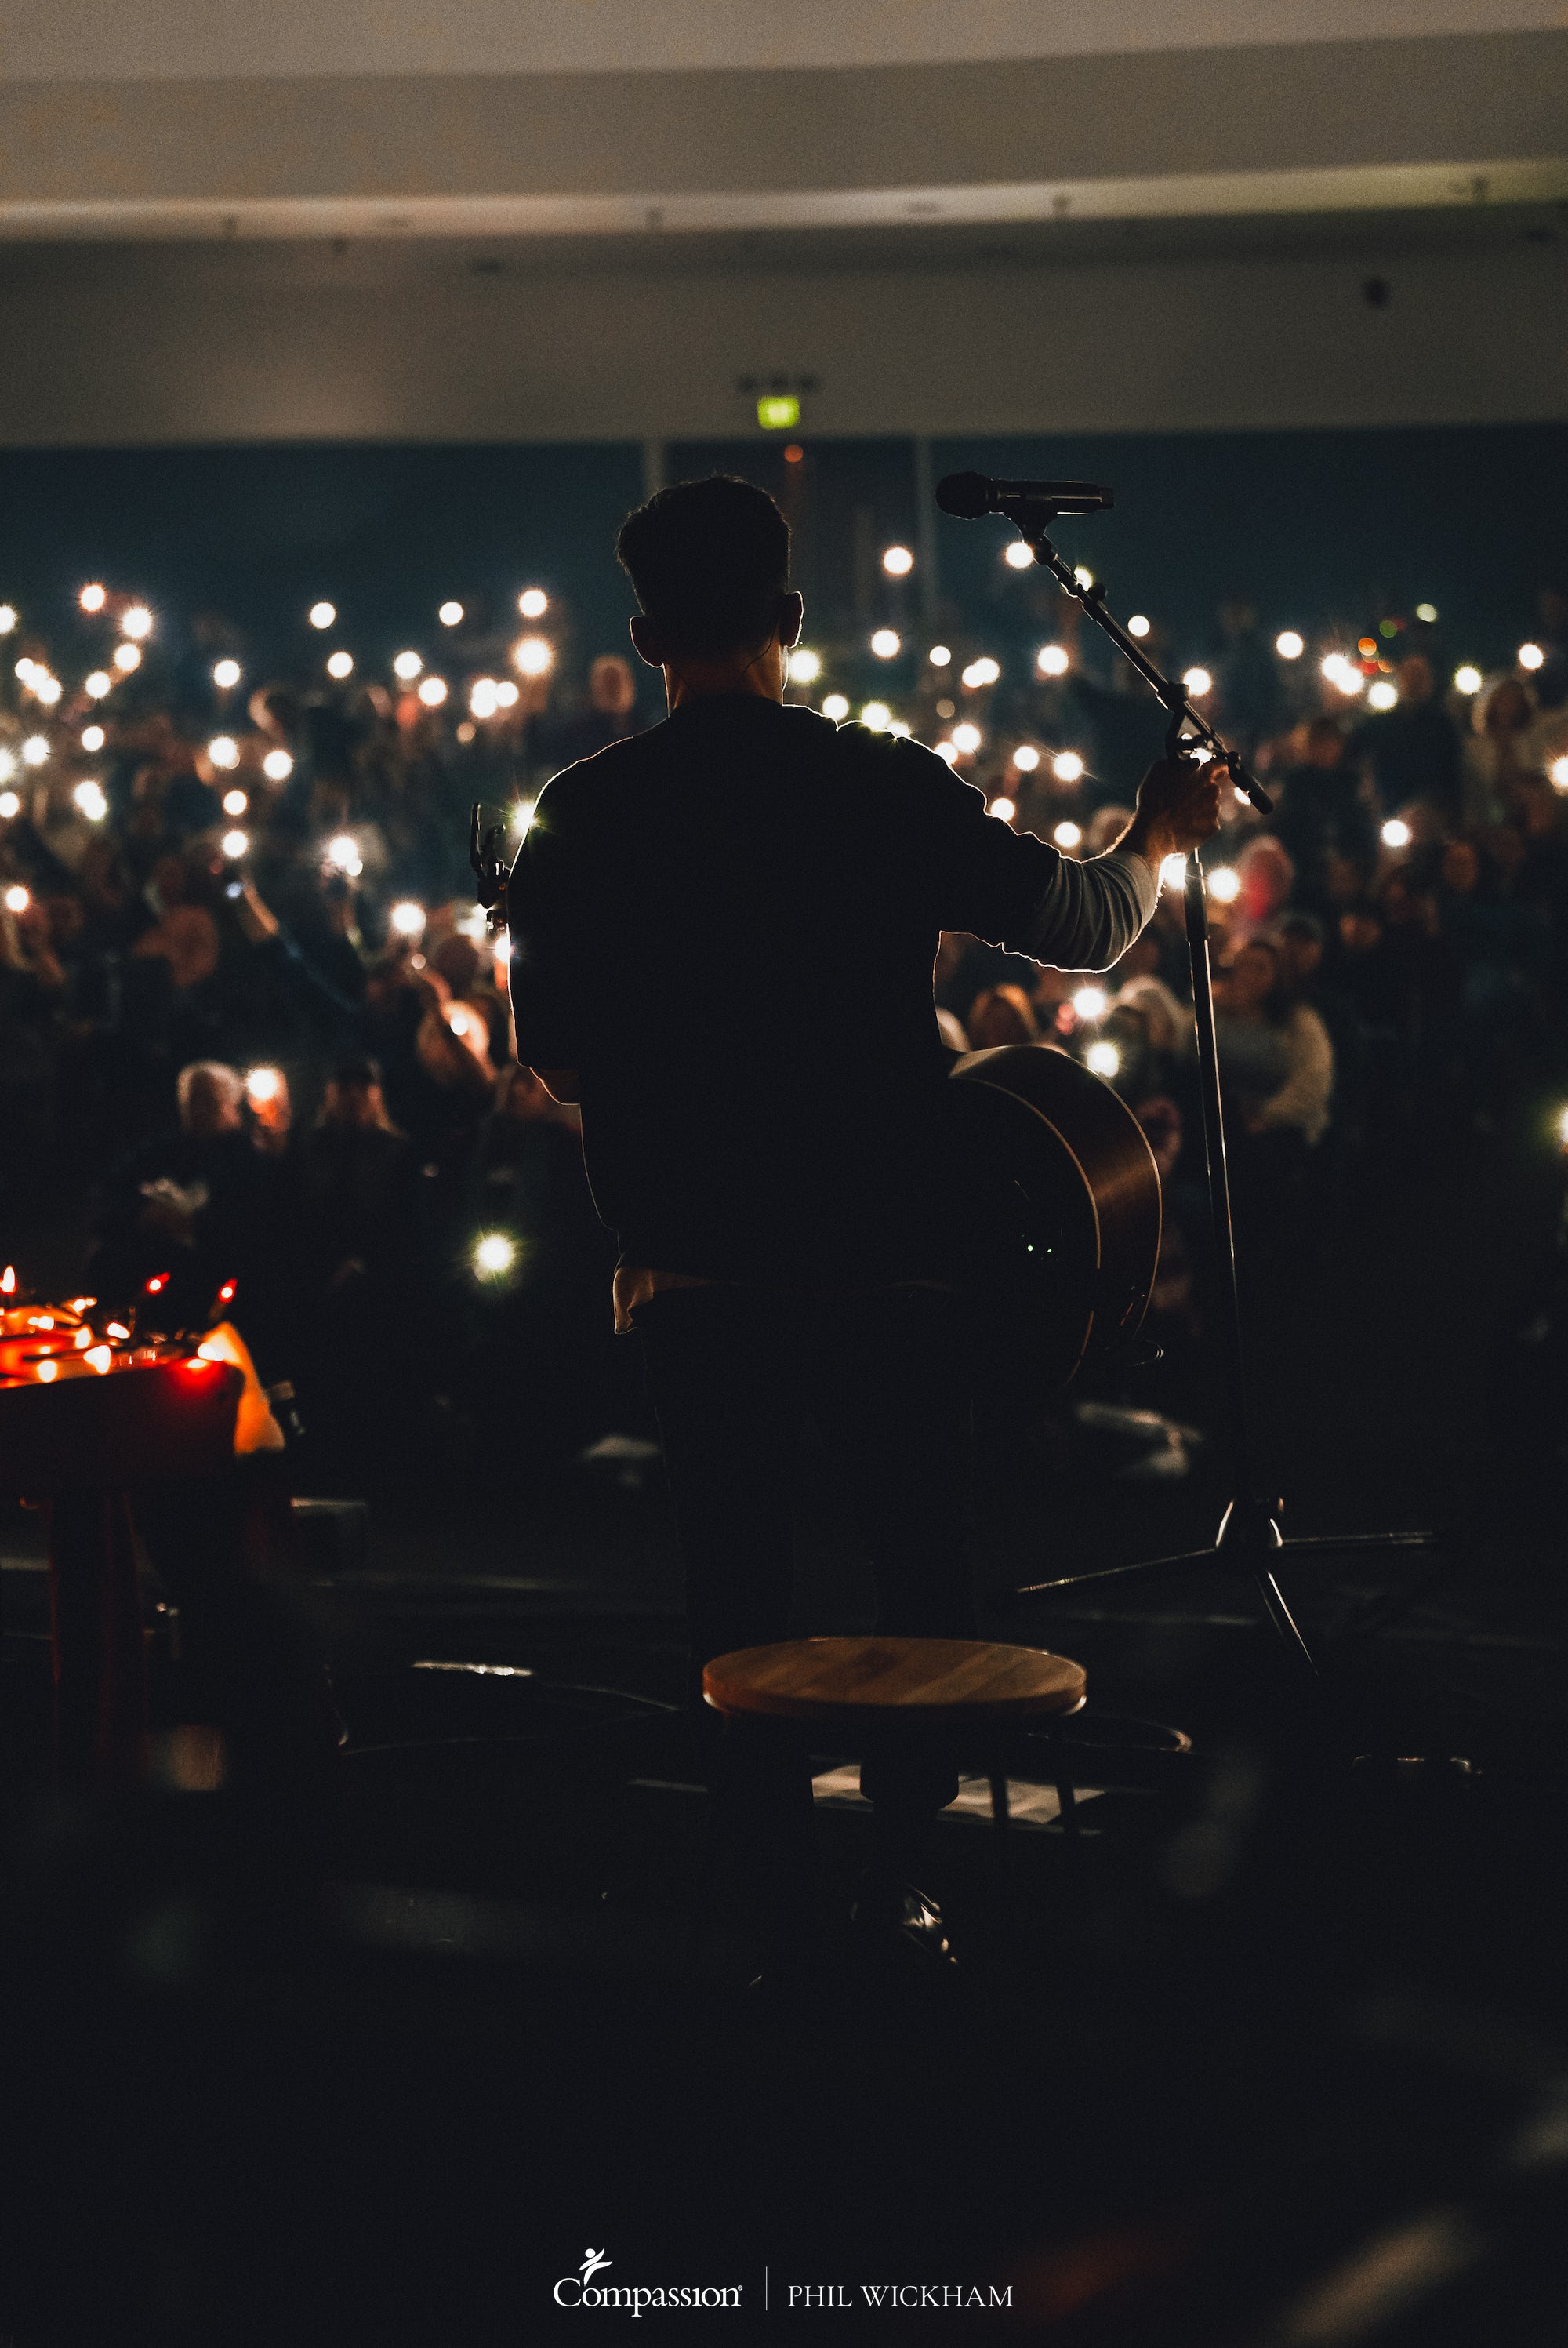 Phil Wickham's Behold Tour Christmas Nights Positive Encouraging KLOVE